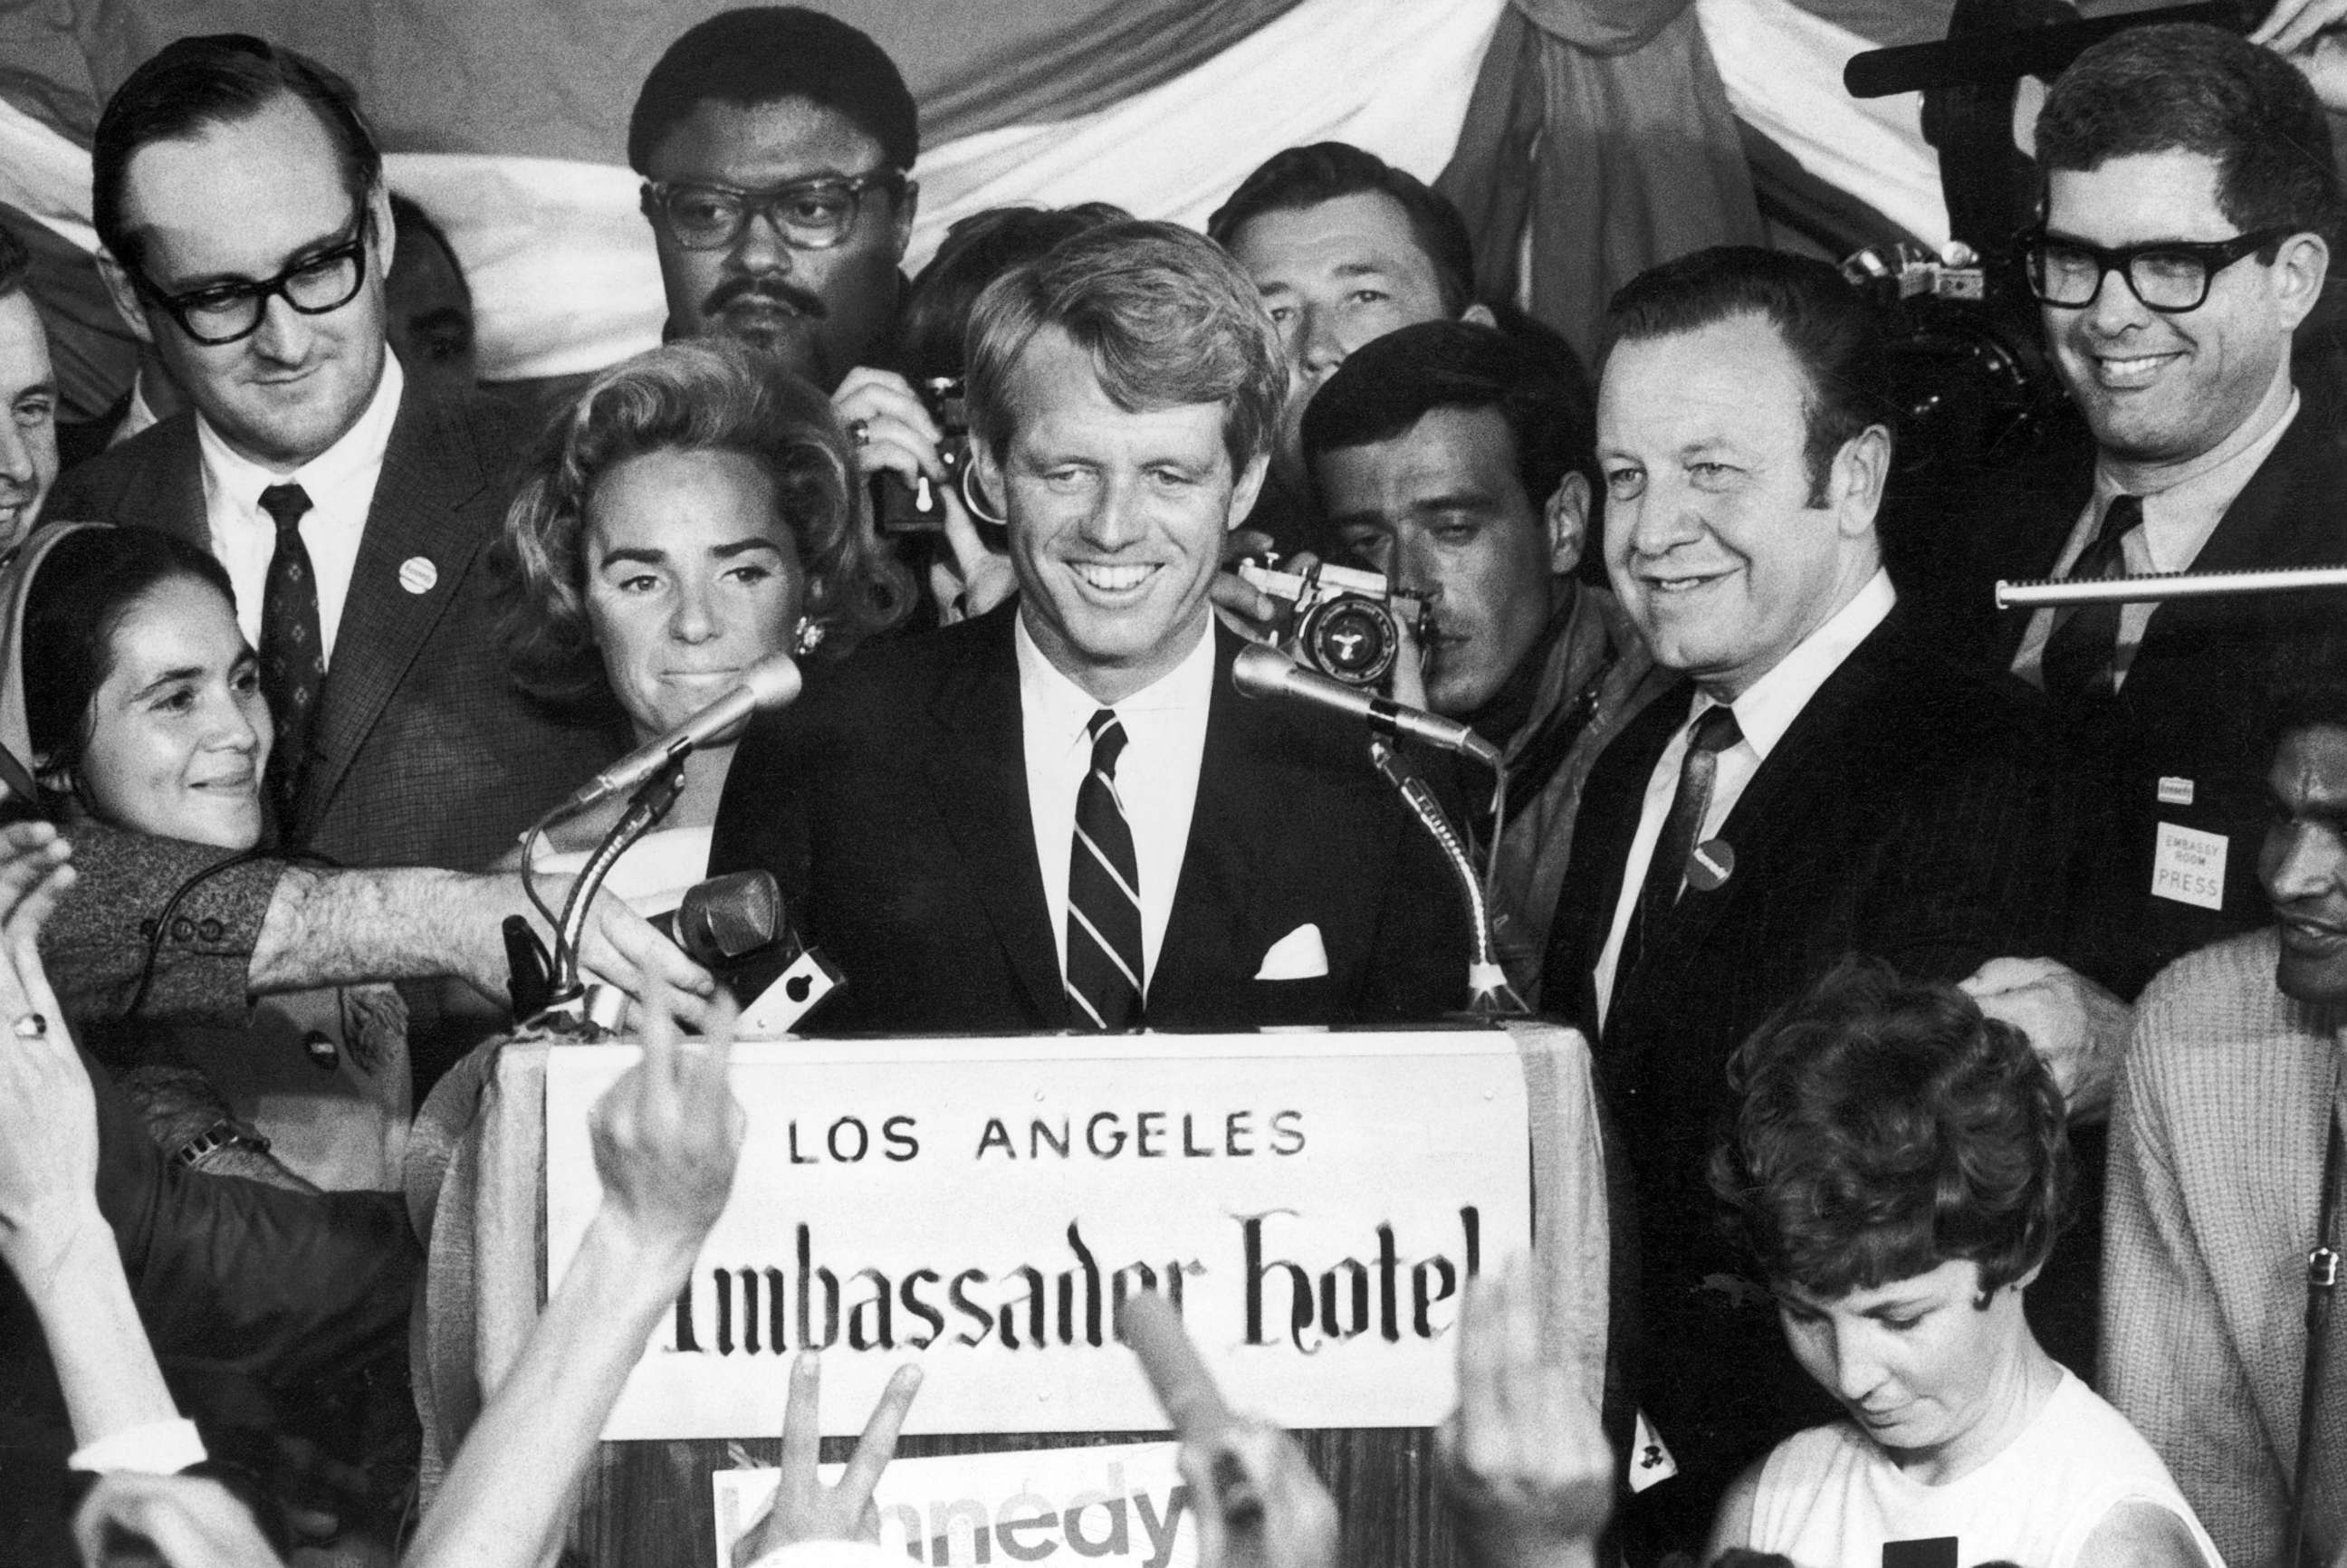 PHOTO: Sen. Robert Kennedy addressing a crowd from a stage with his wife Ethel moments before Kennedy's assassination, Ambassador Hotel in Los Angeles, June 5, 1968.